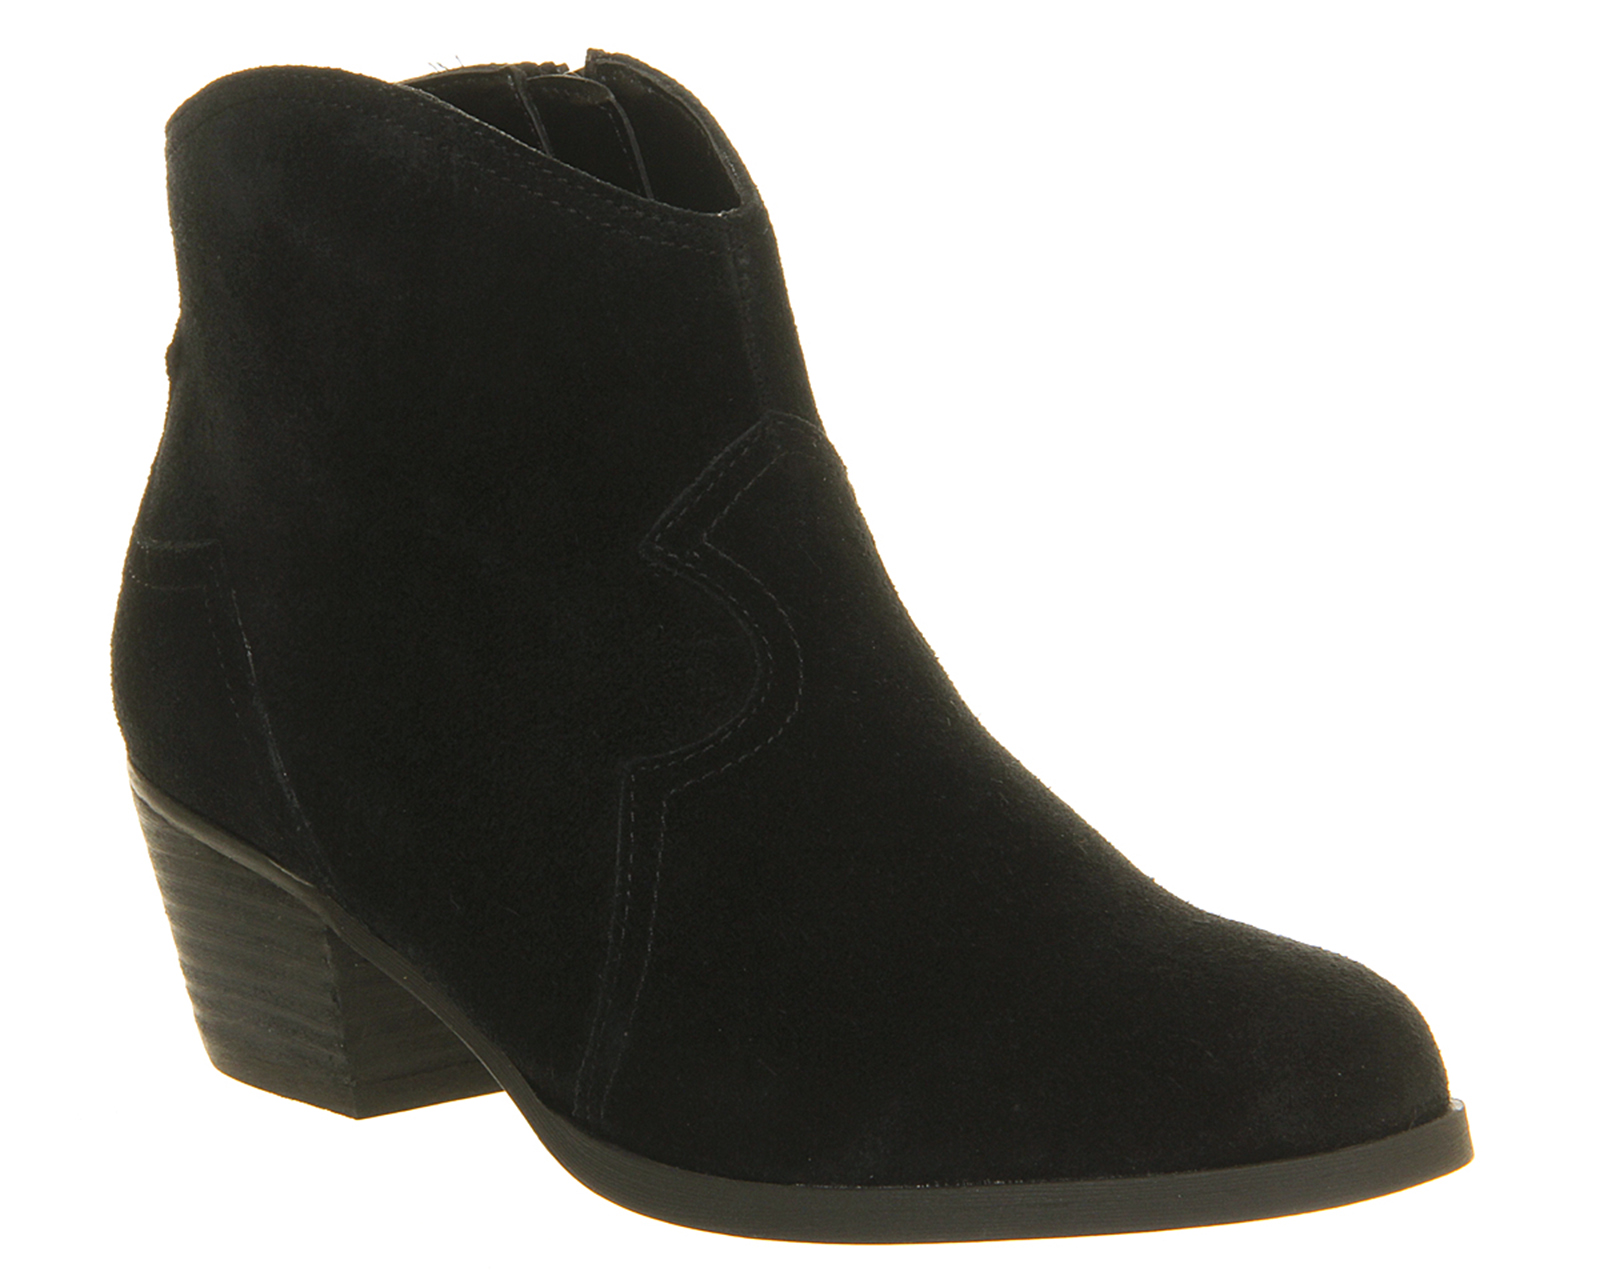 OFFICE Courtney Suede Western boots Black Suede - Women's Ankle Boots